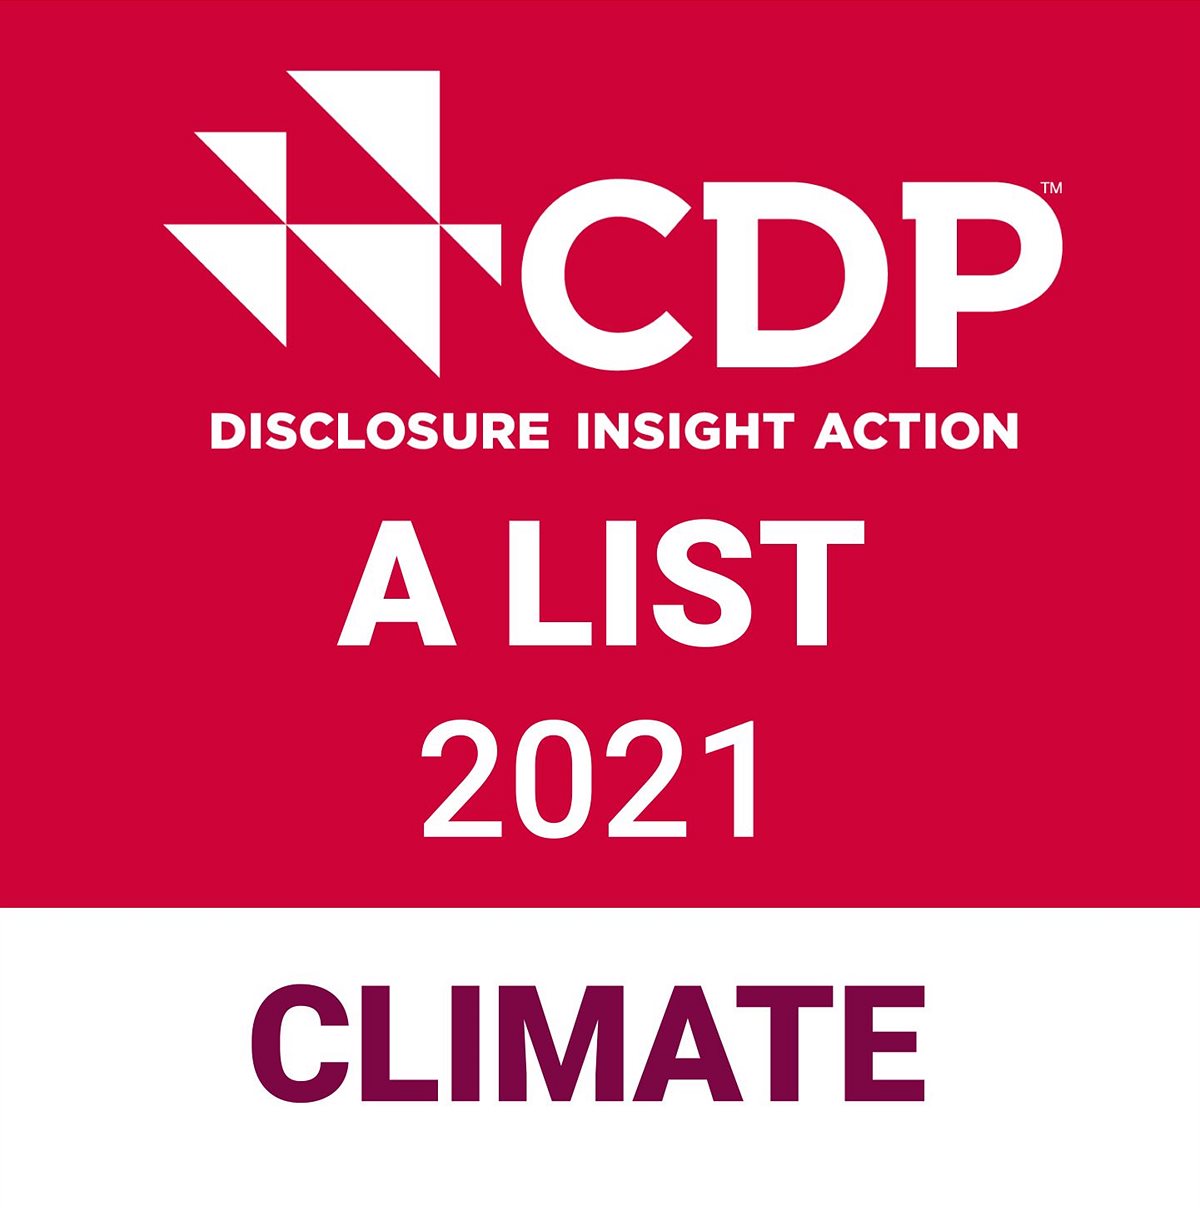 “Climate Stamp” 2021